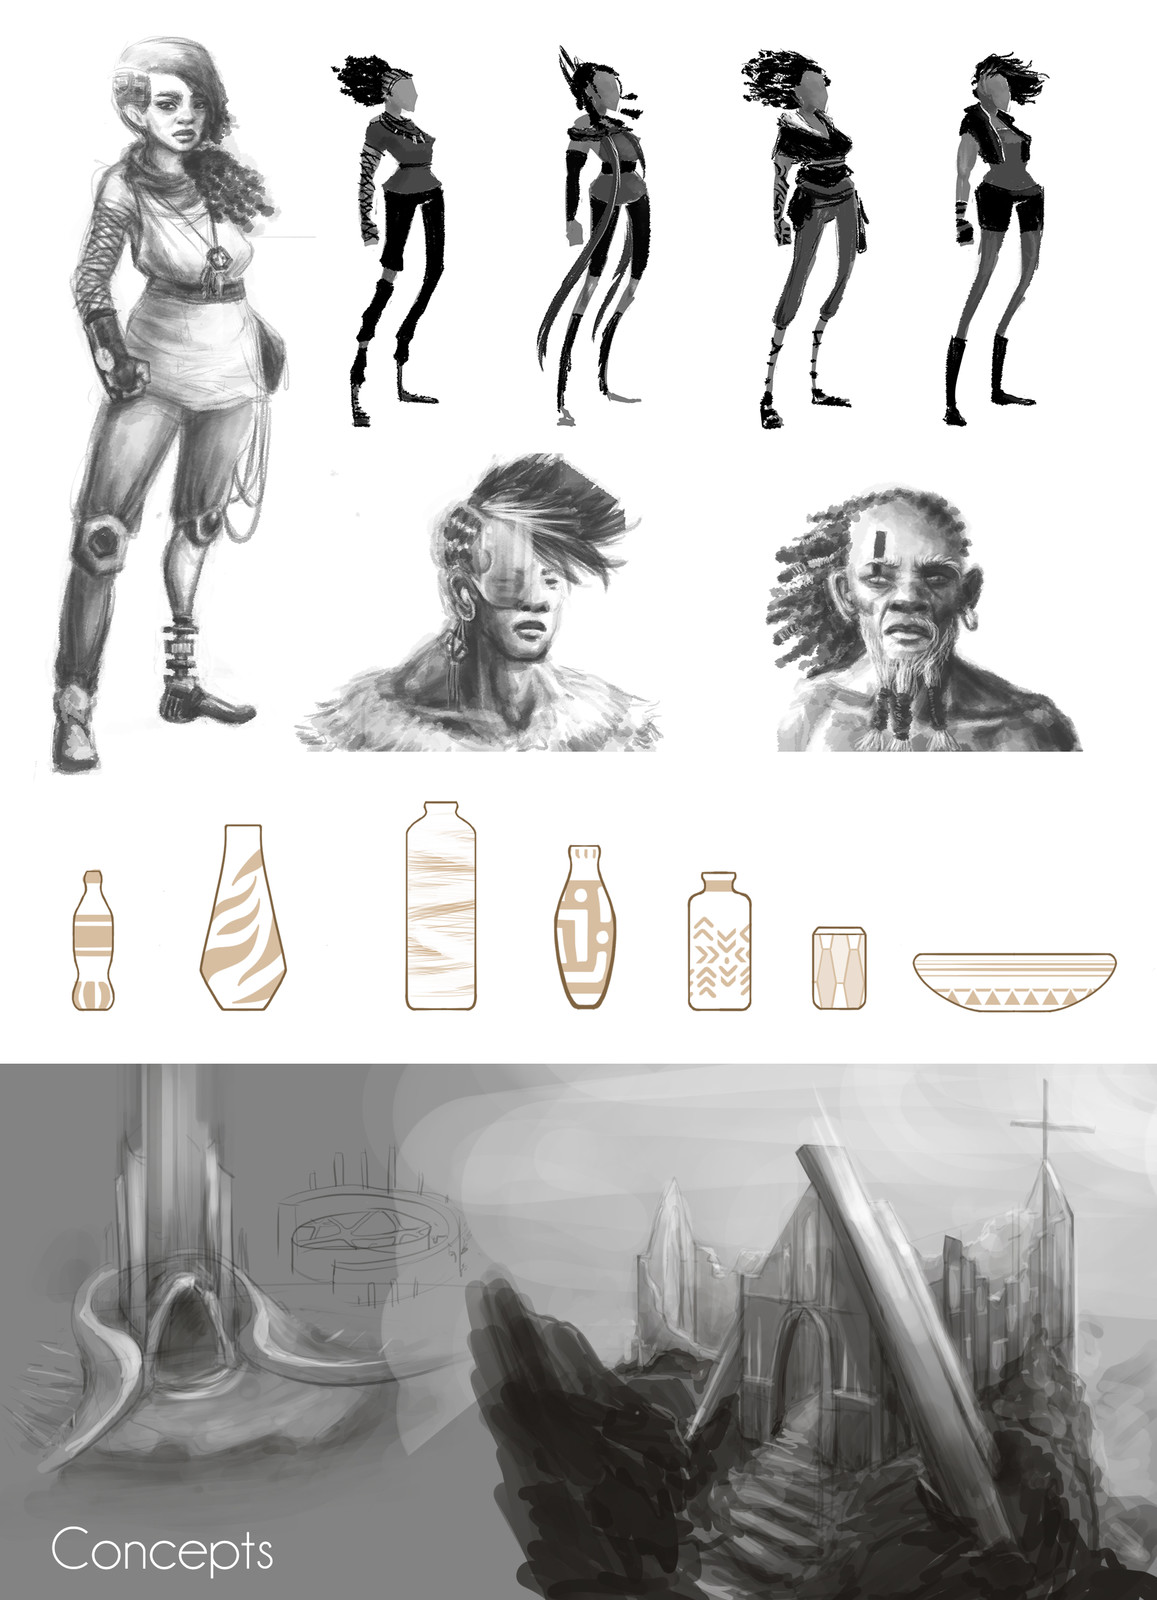 Concept arts for the main character, a female shaman who has survived the apocalypse but lost her arm, and another shaman and tribal people.
Some researches for the environment, universe and mood as well.